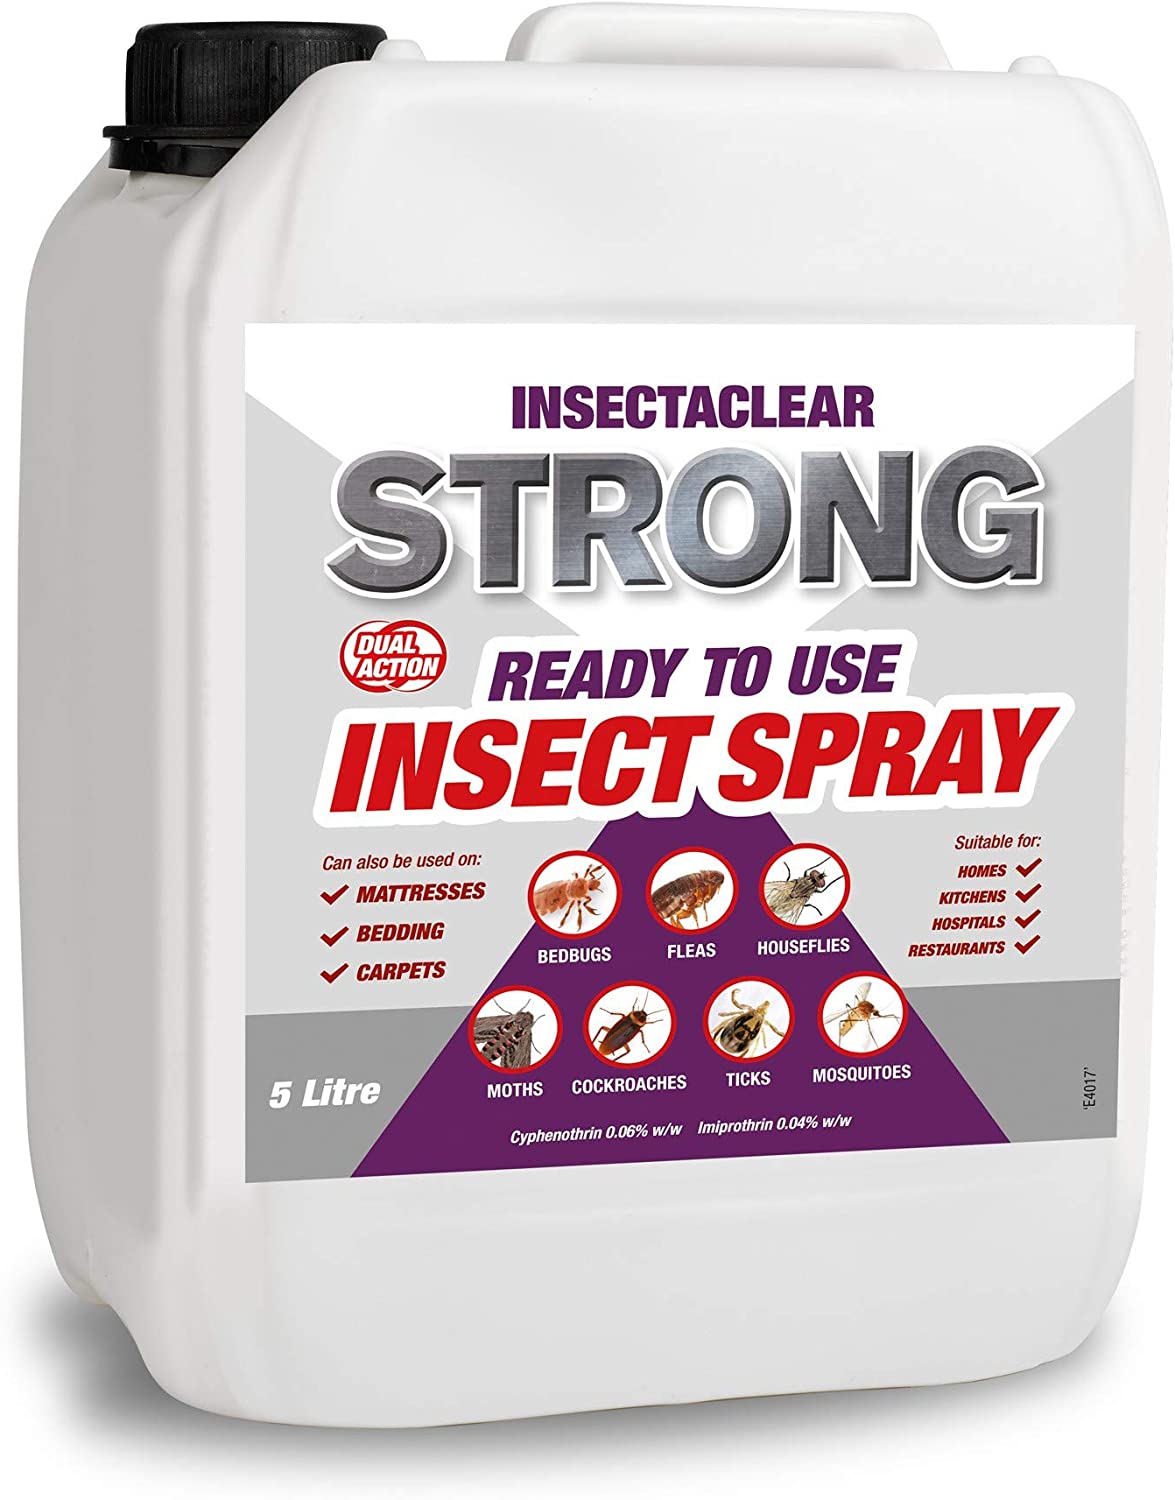 Insect Spray - Insectaclear STRONG 5 litre - Moth Control